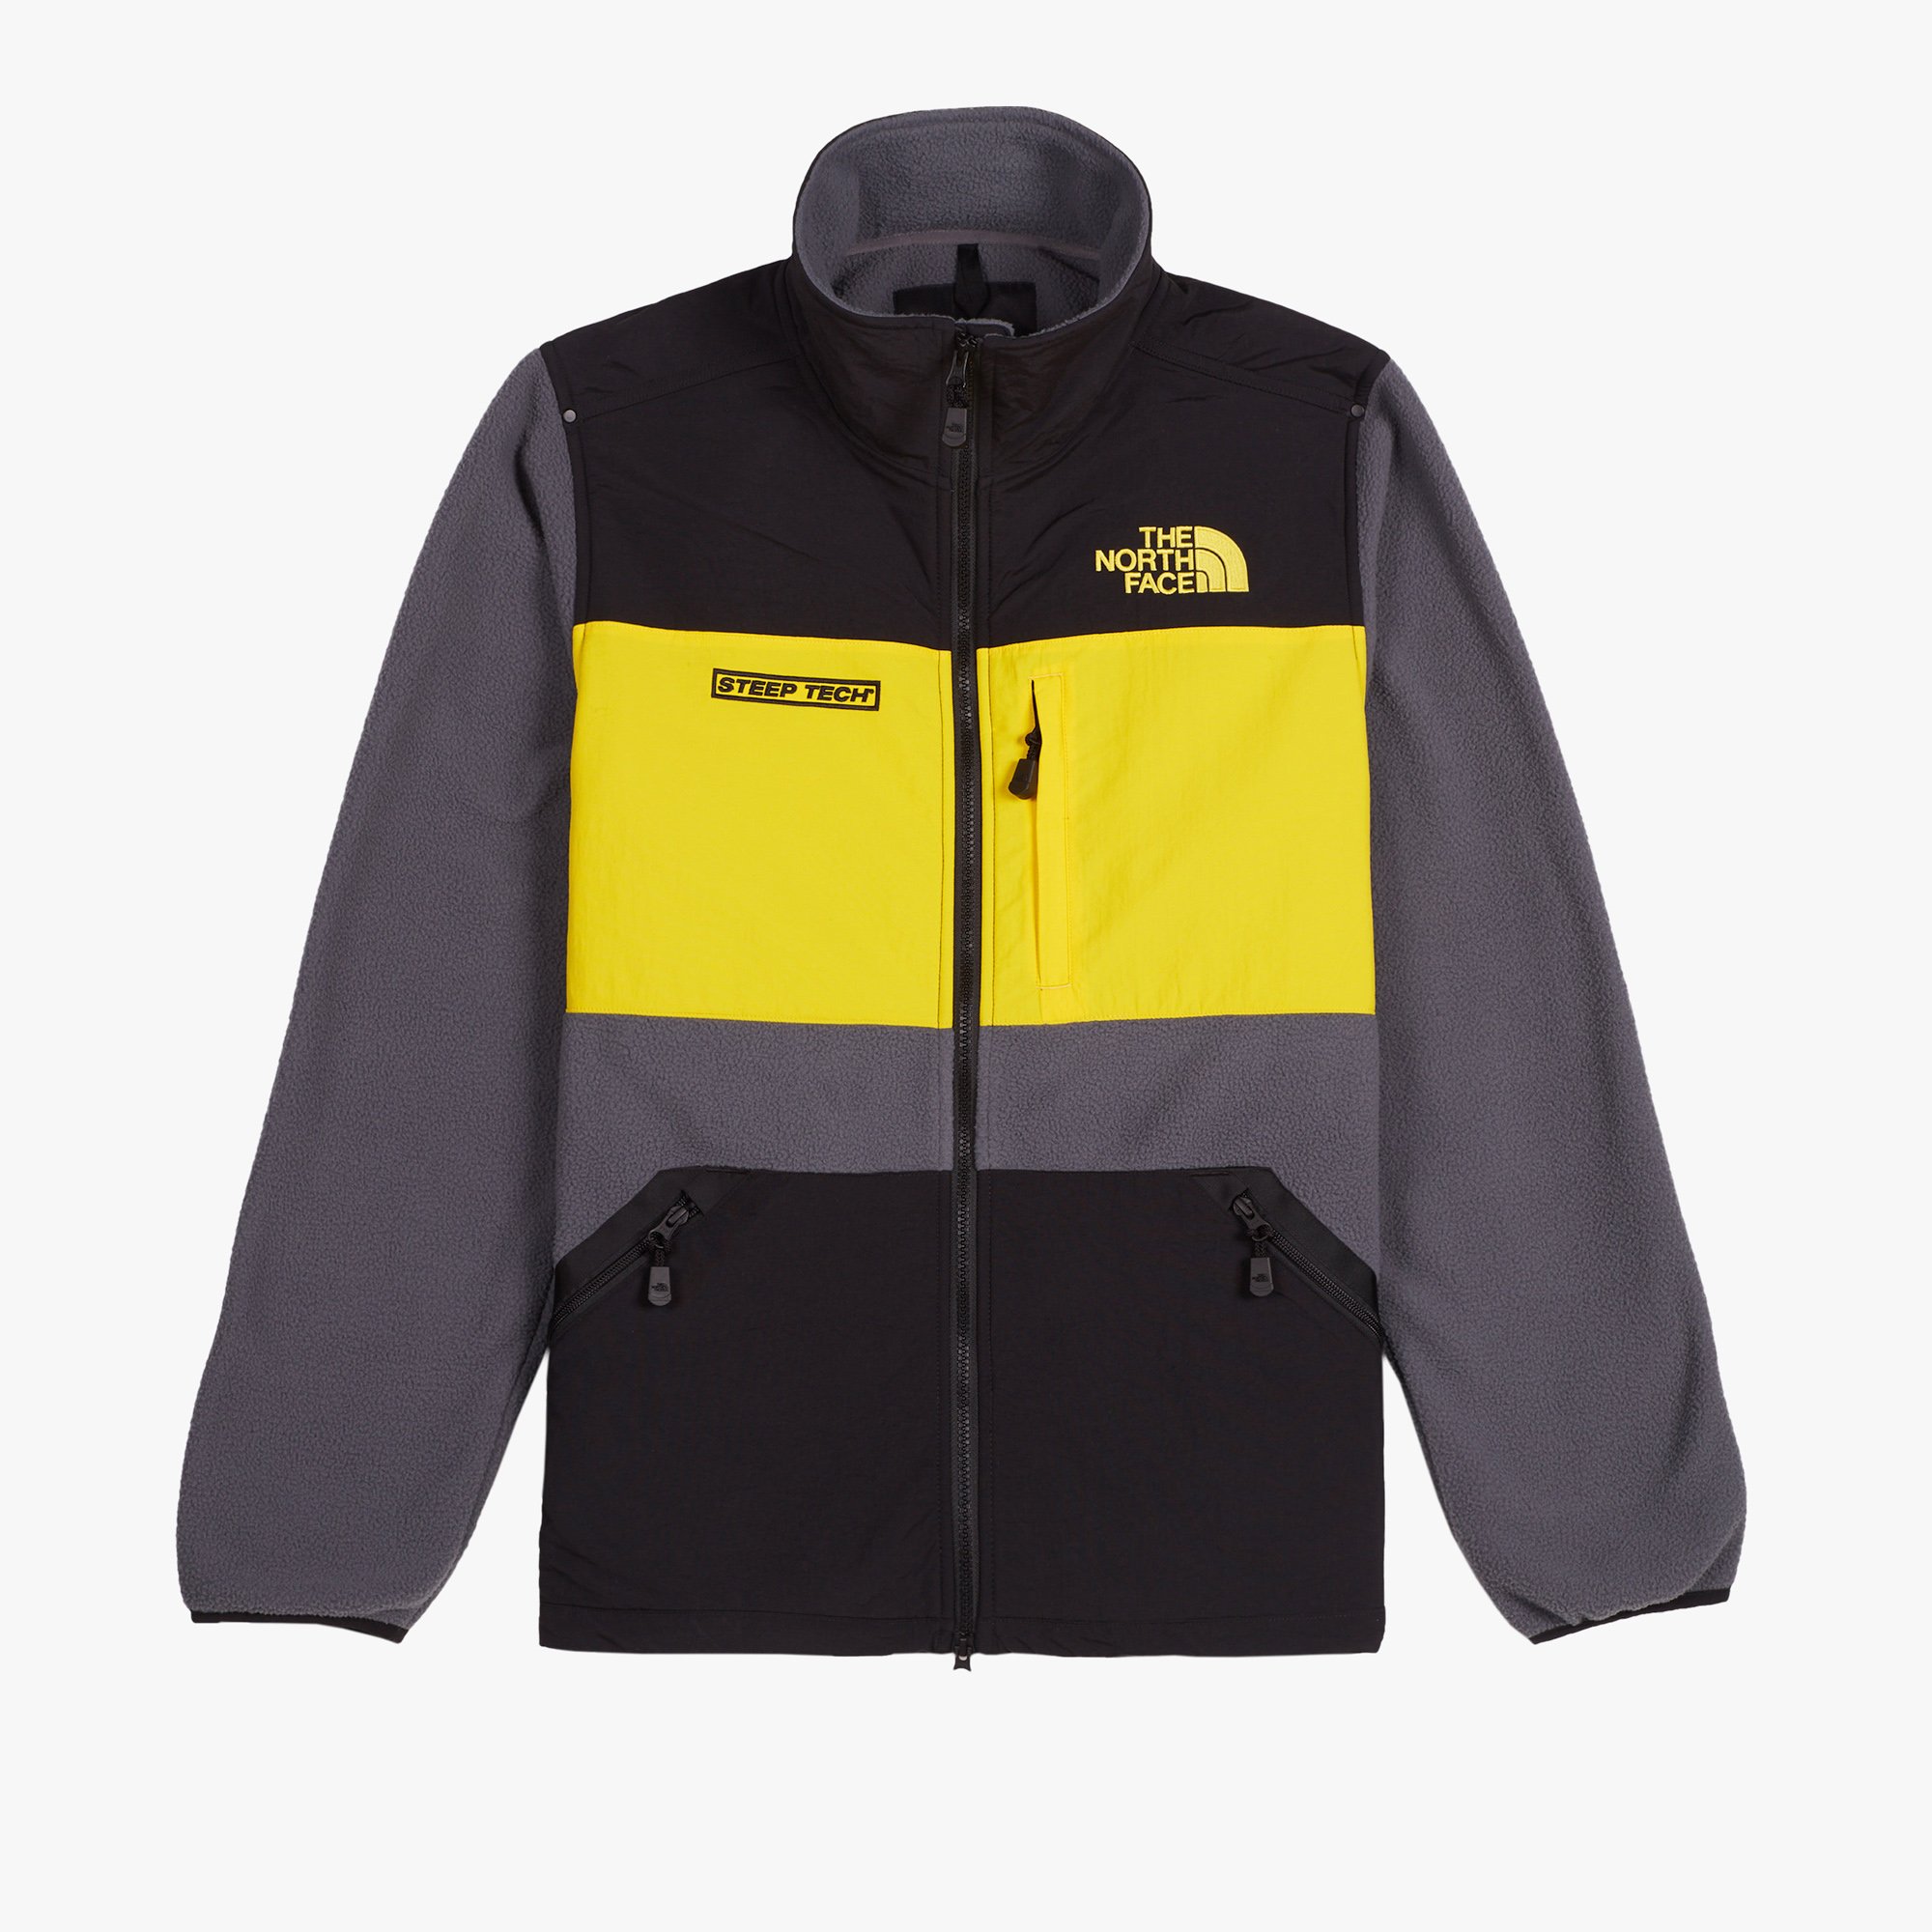 North Face Steep Tech Fleeces have been Retroed